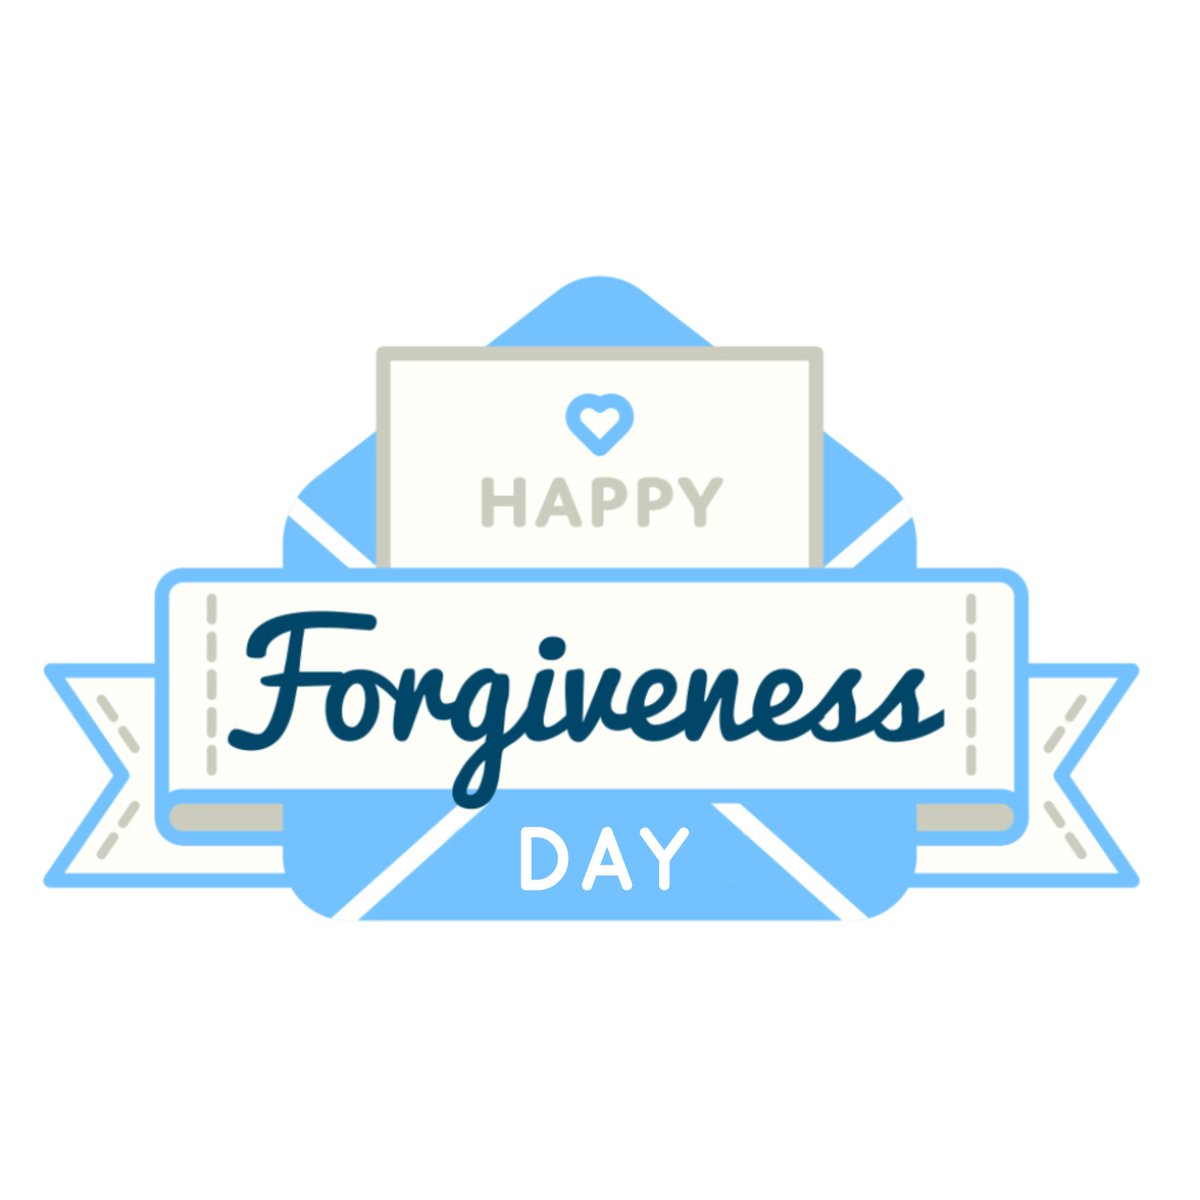 Forgiveness doesn't change the past but it does change the future! #ForgivenessDay